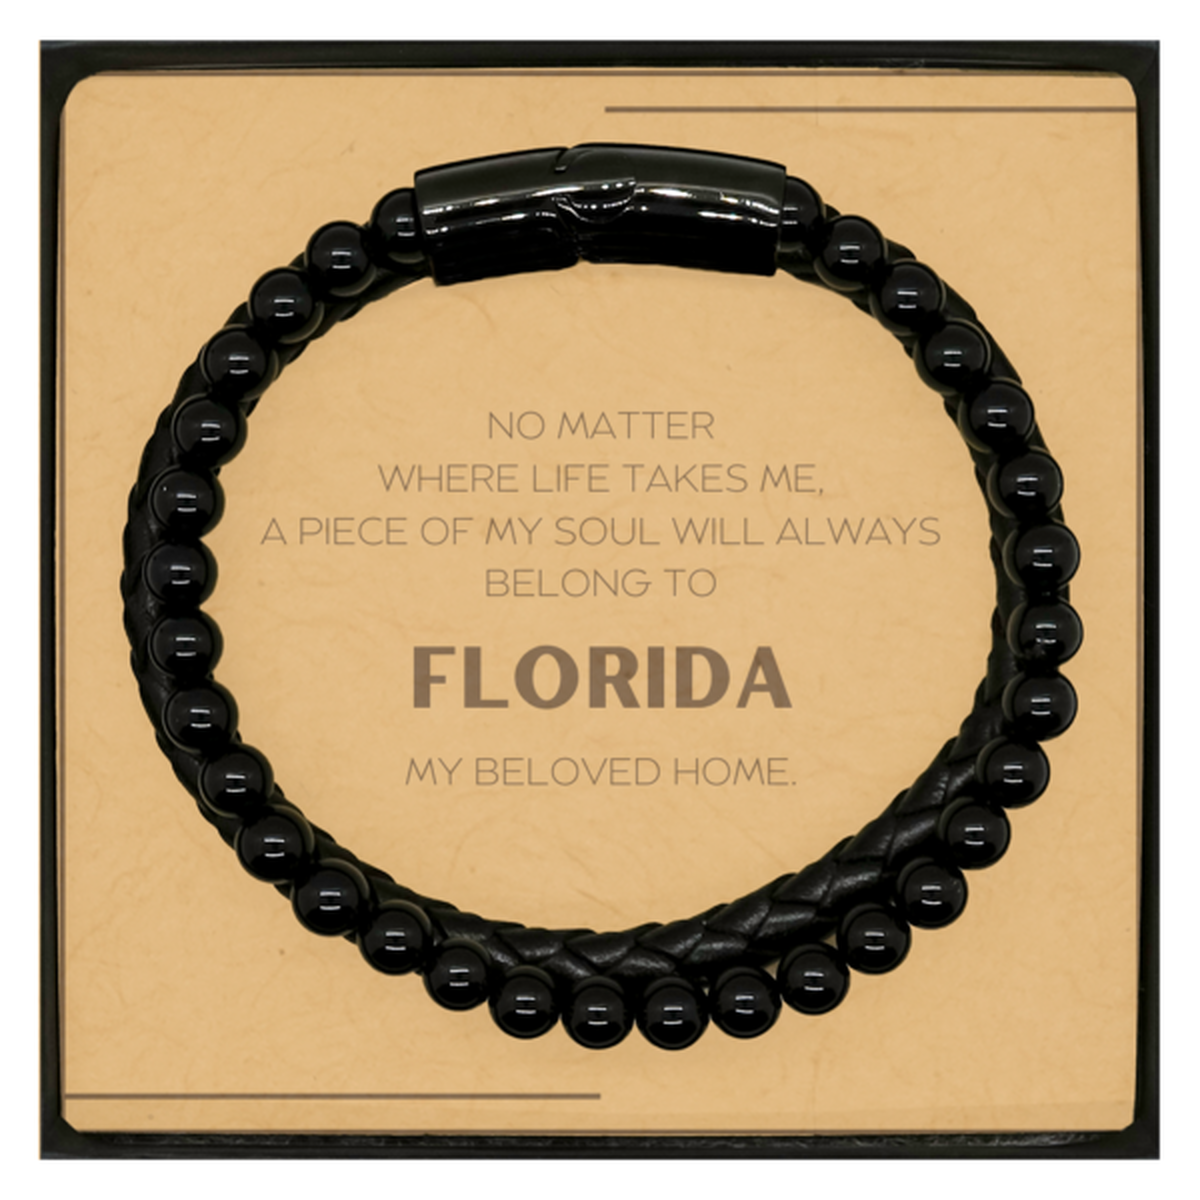 Love Florida State Gifts, My soul will always belong to Florida, Proud Stone Leather Bracelets, Birthday Christmas Unique Gifts For Florida Men, Women, Friends